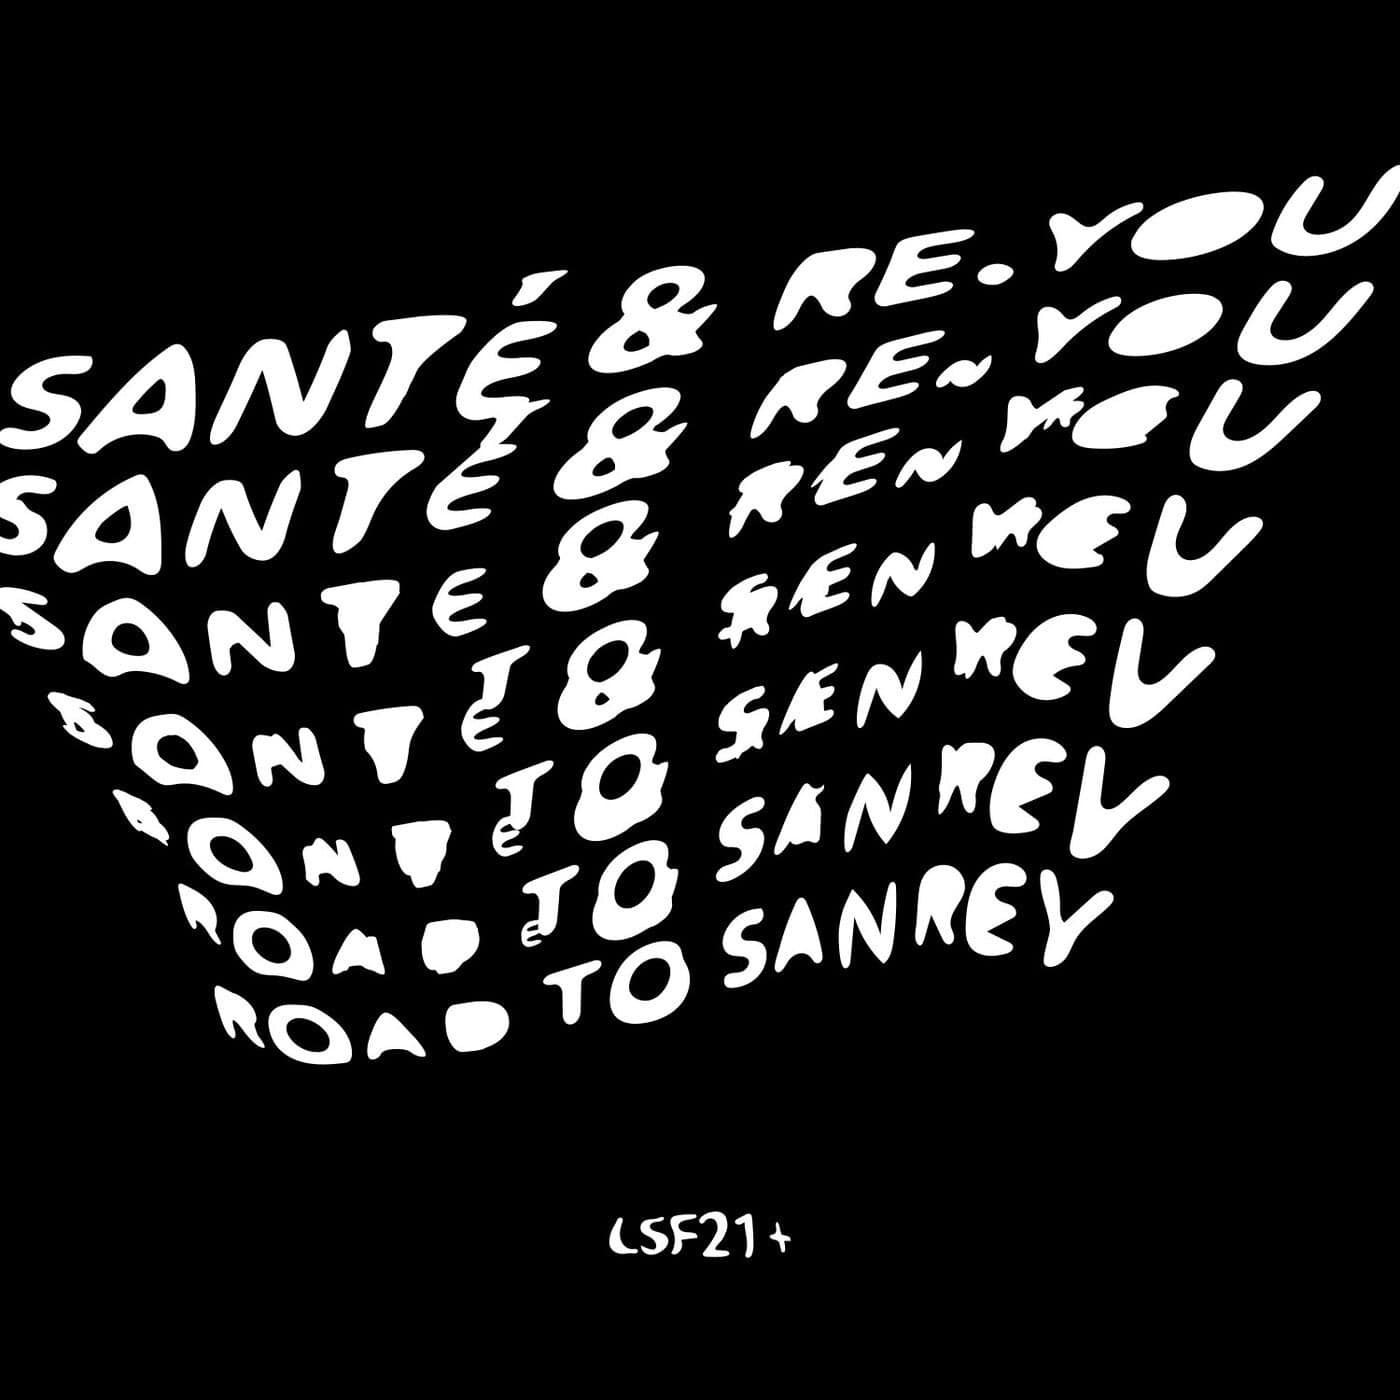 image cover: Sante, Re.you - Road To Sanrey / LSF006